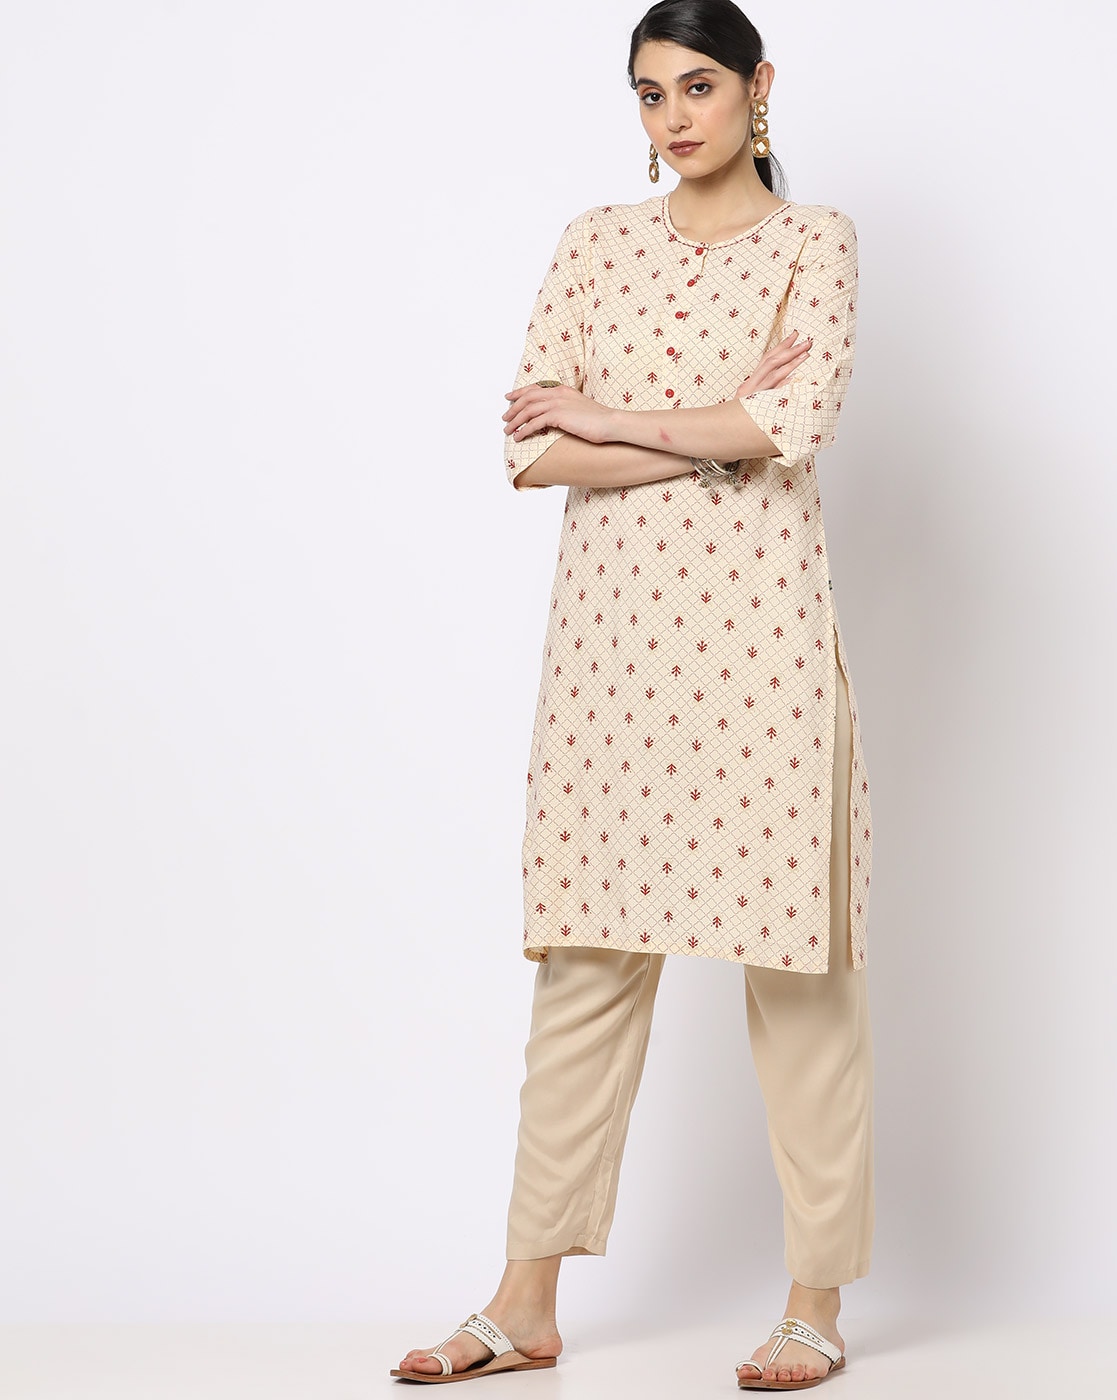 Buy Cream Leggings for Women by AVAASA MIX N' MATCH Online